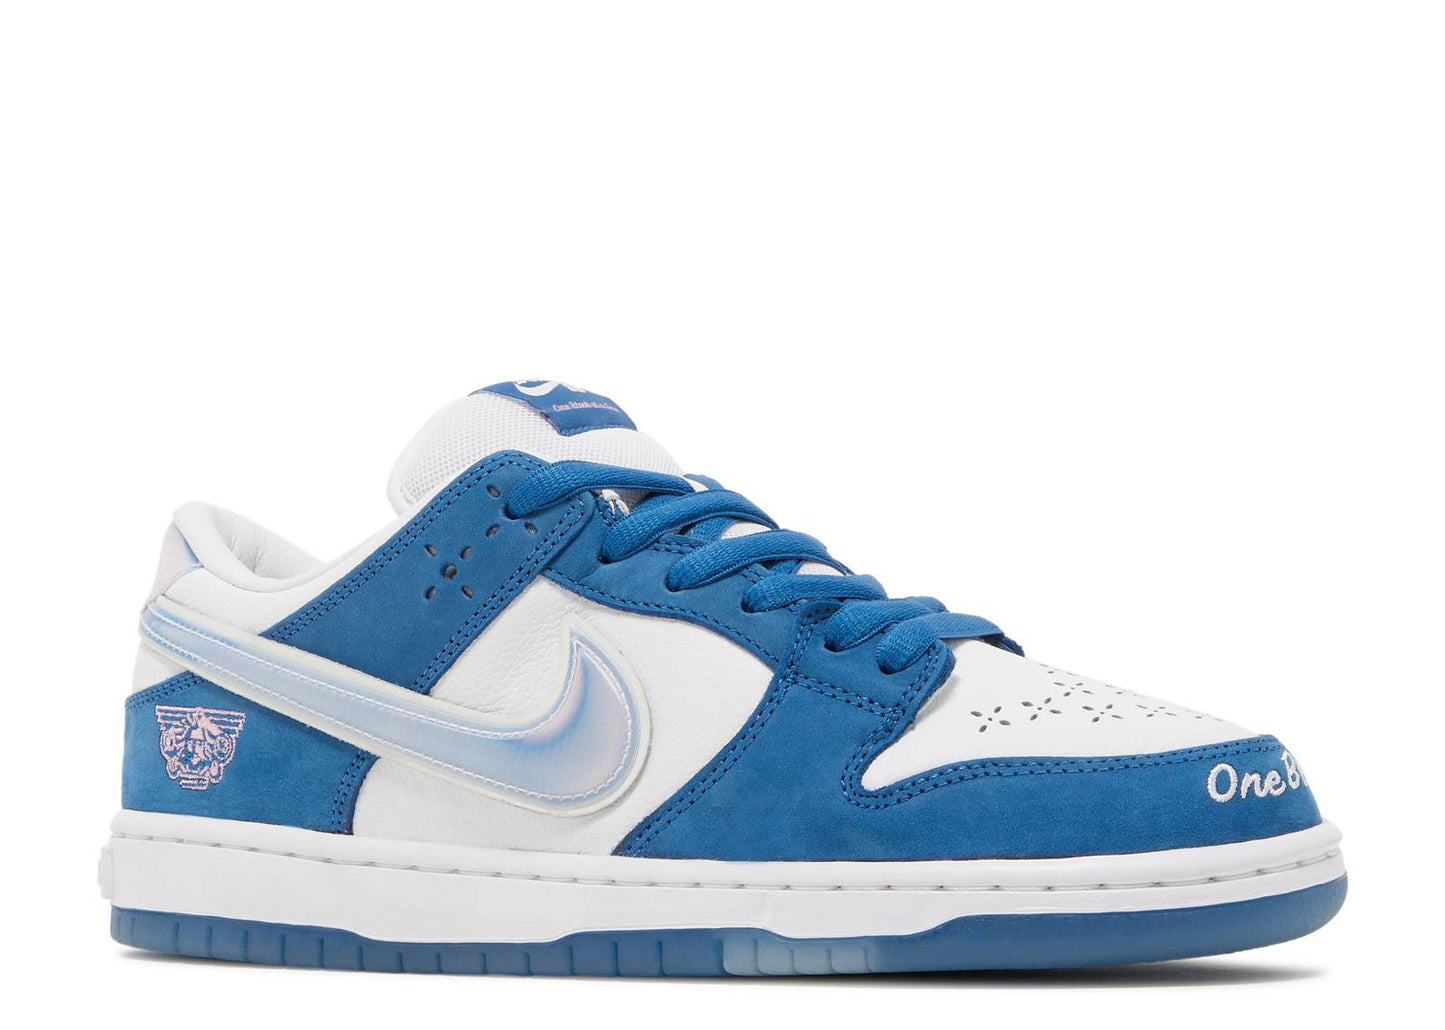 Born x Raised x Nike SB Dunk Low Pro QS "One Block at a Time"